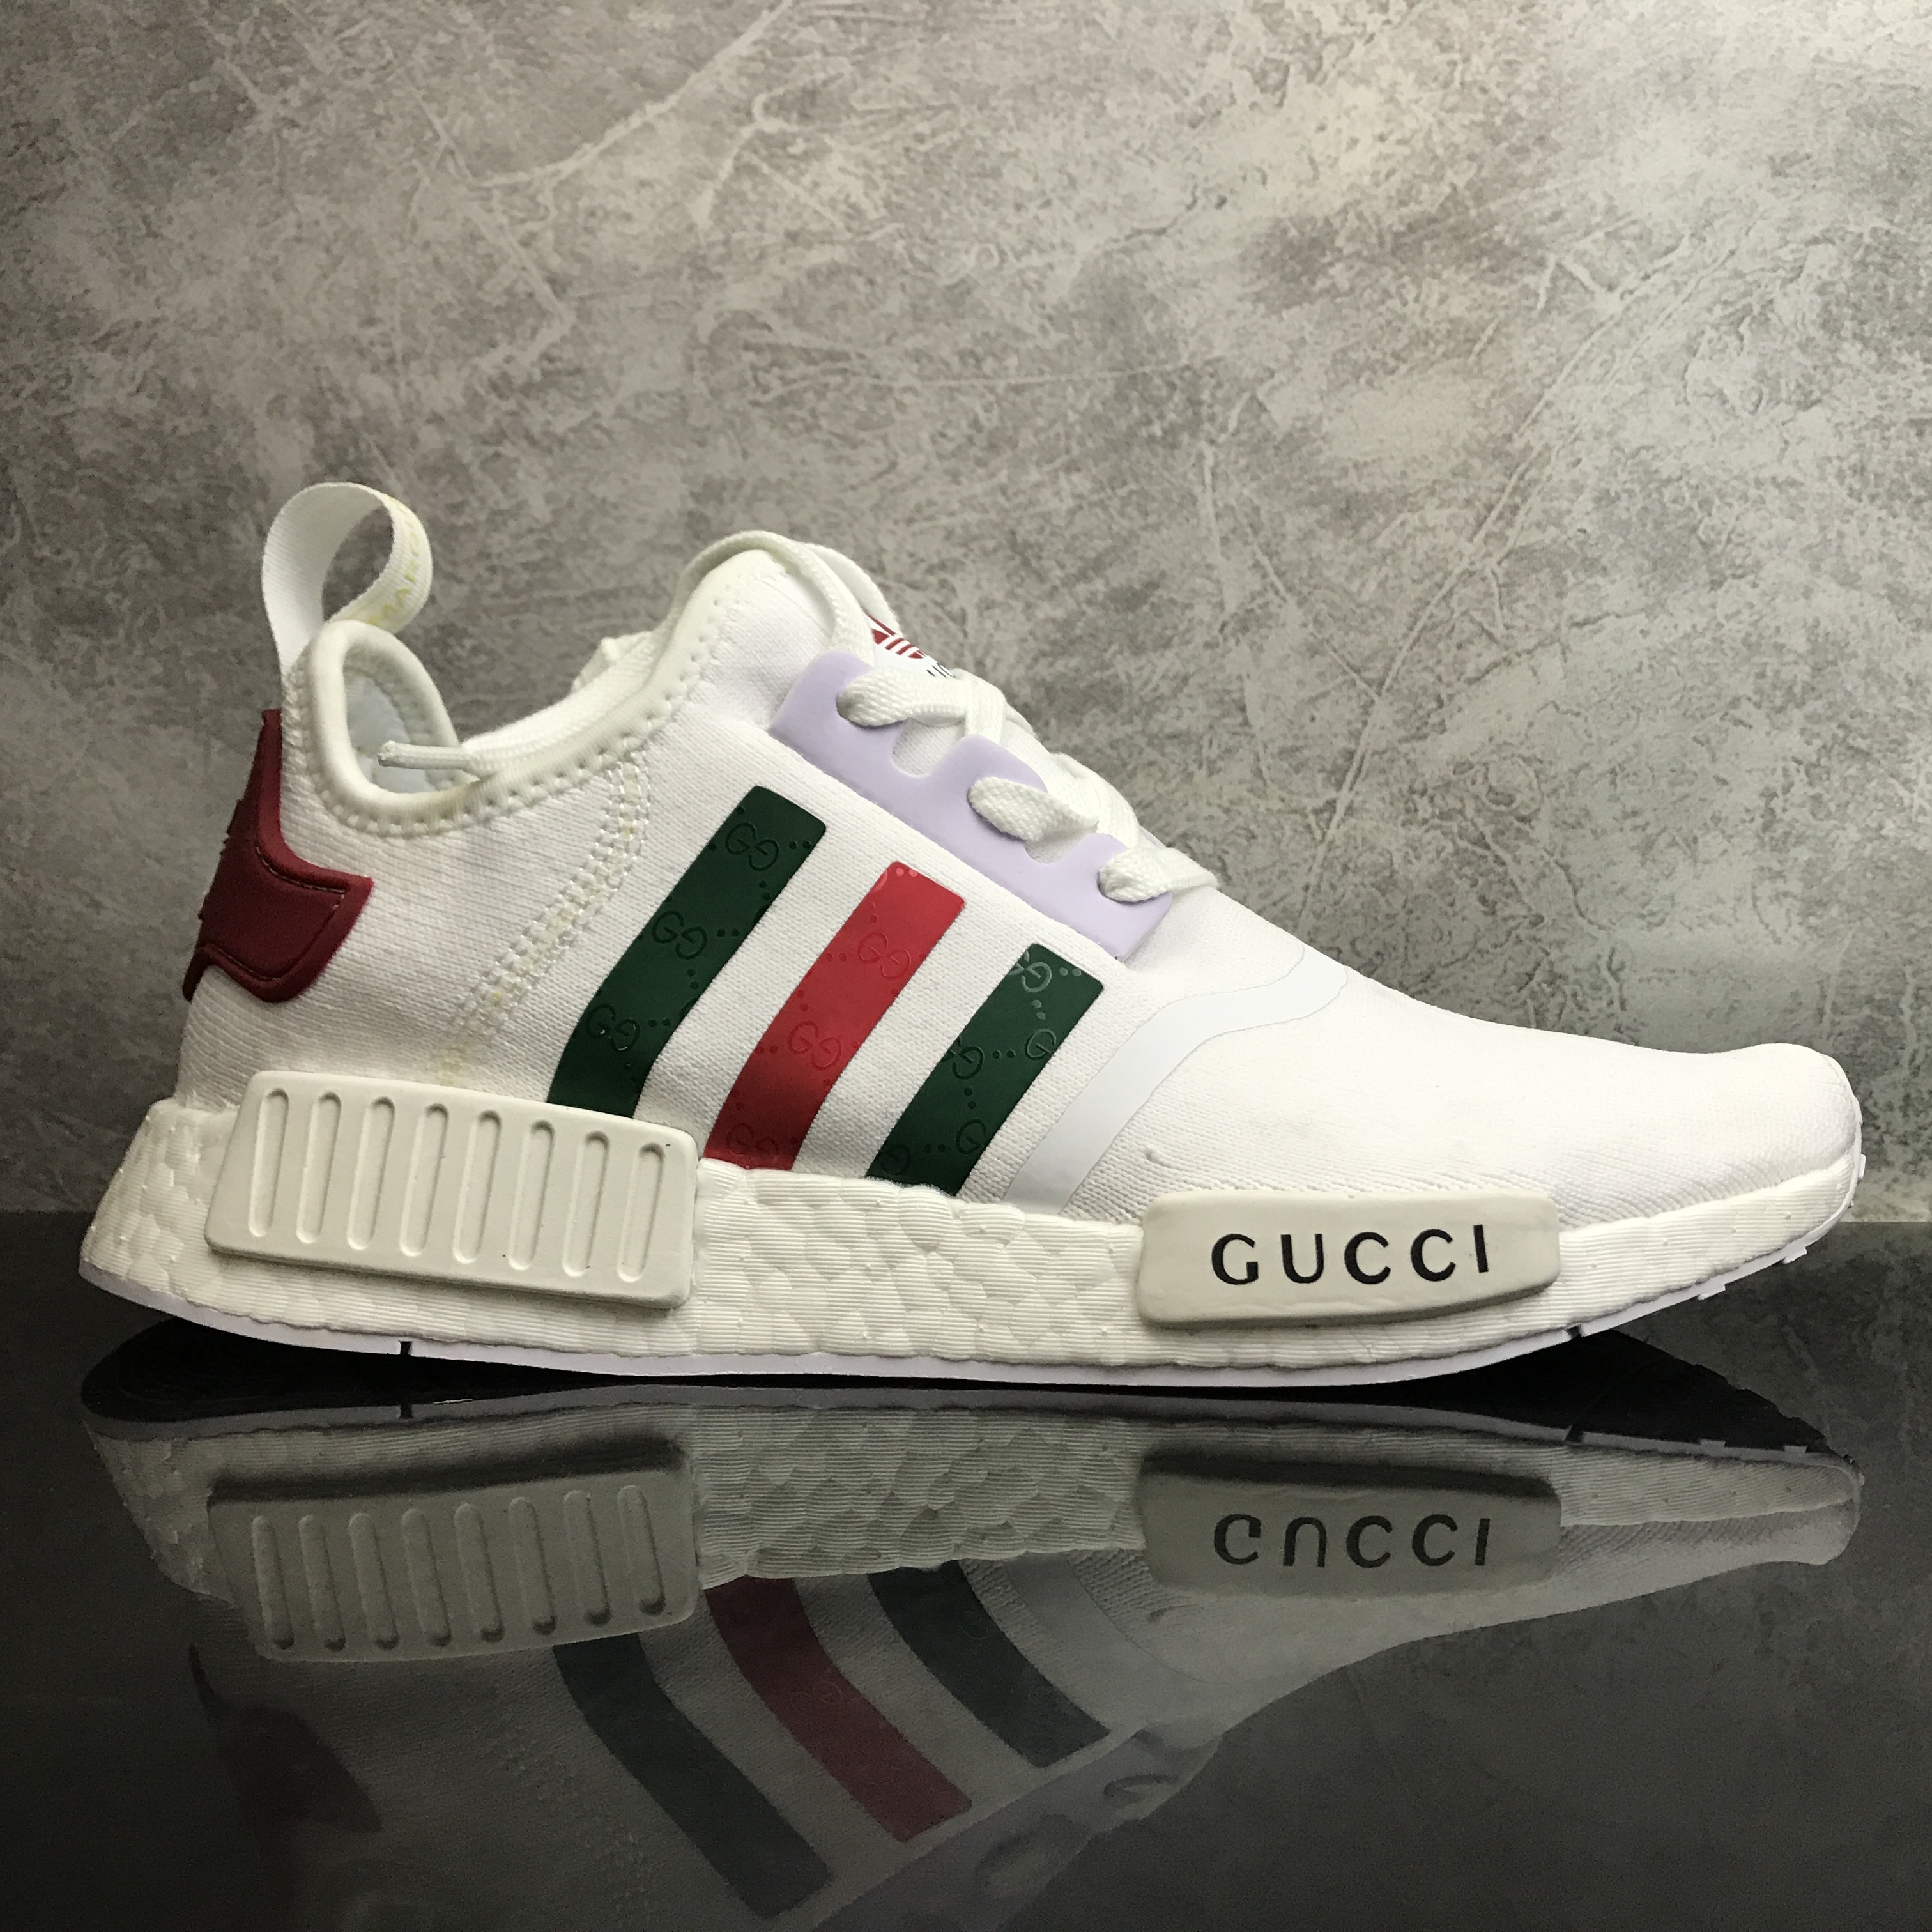 2017 Best Replica Gucci x Adidas NMD R1 Beige from kickonfires